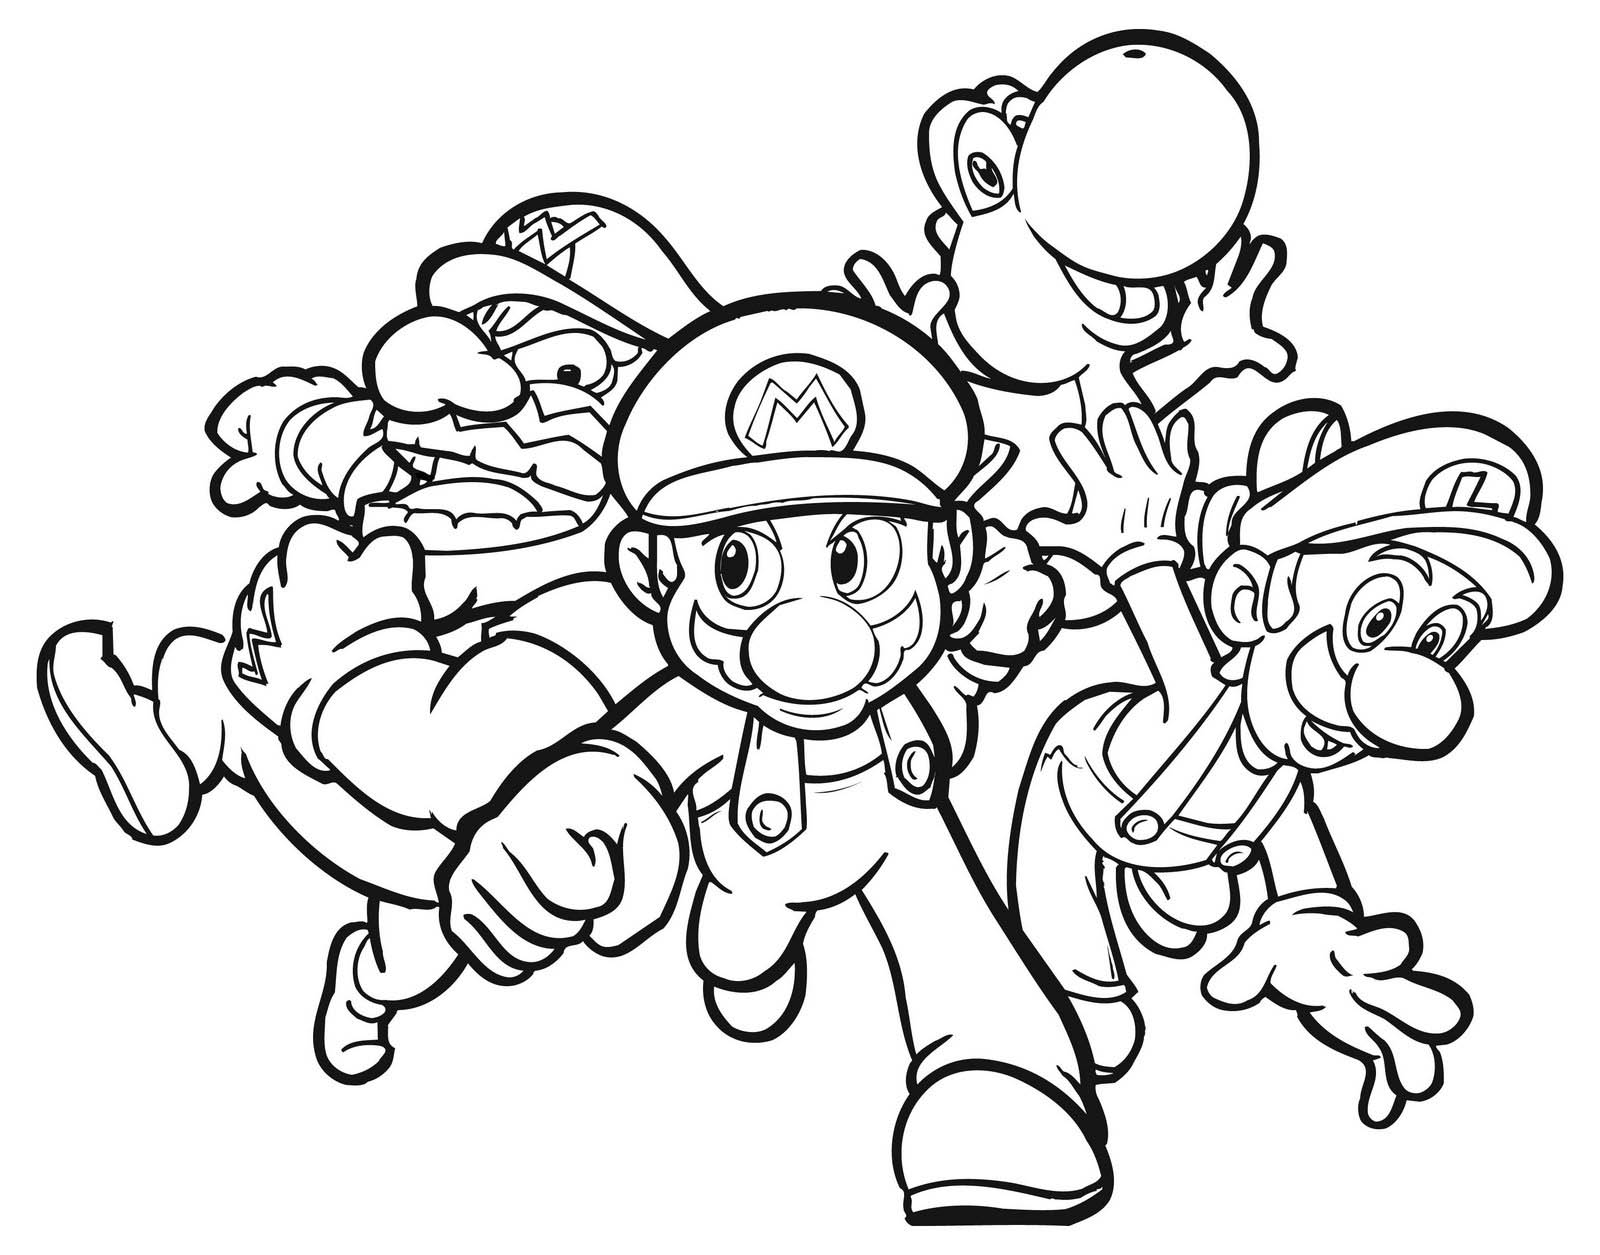 Super Mario Coloring Pages ~ Free Printable Coloring Pages ...